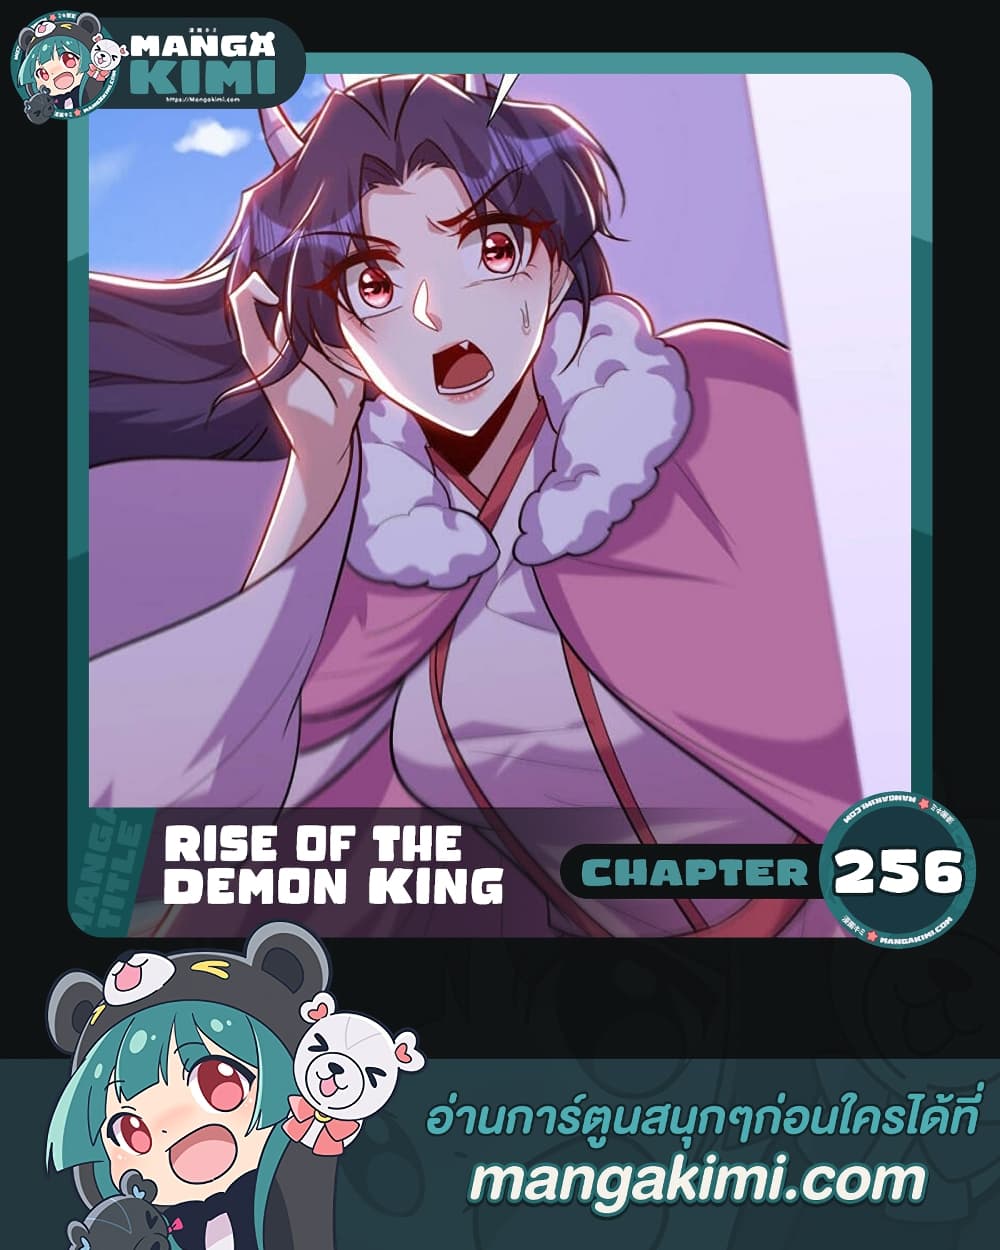 Rise of The Demon King เธฃเธธเนเธเธญเธฃเธธเธ“เนเธซเนเธเธฃเธฒเธเธฒเธเธตเธจเธฒเธ เธ•เธญเธเธ—เธตเน 256 (1)